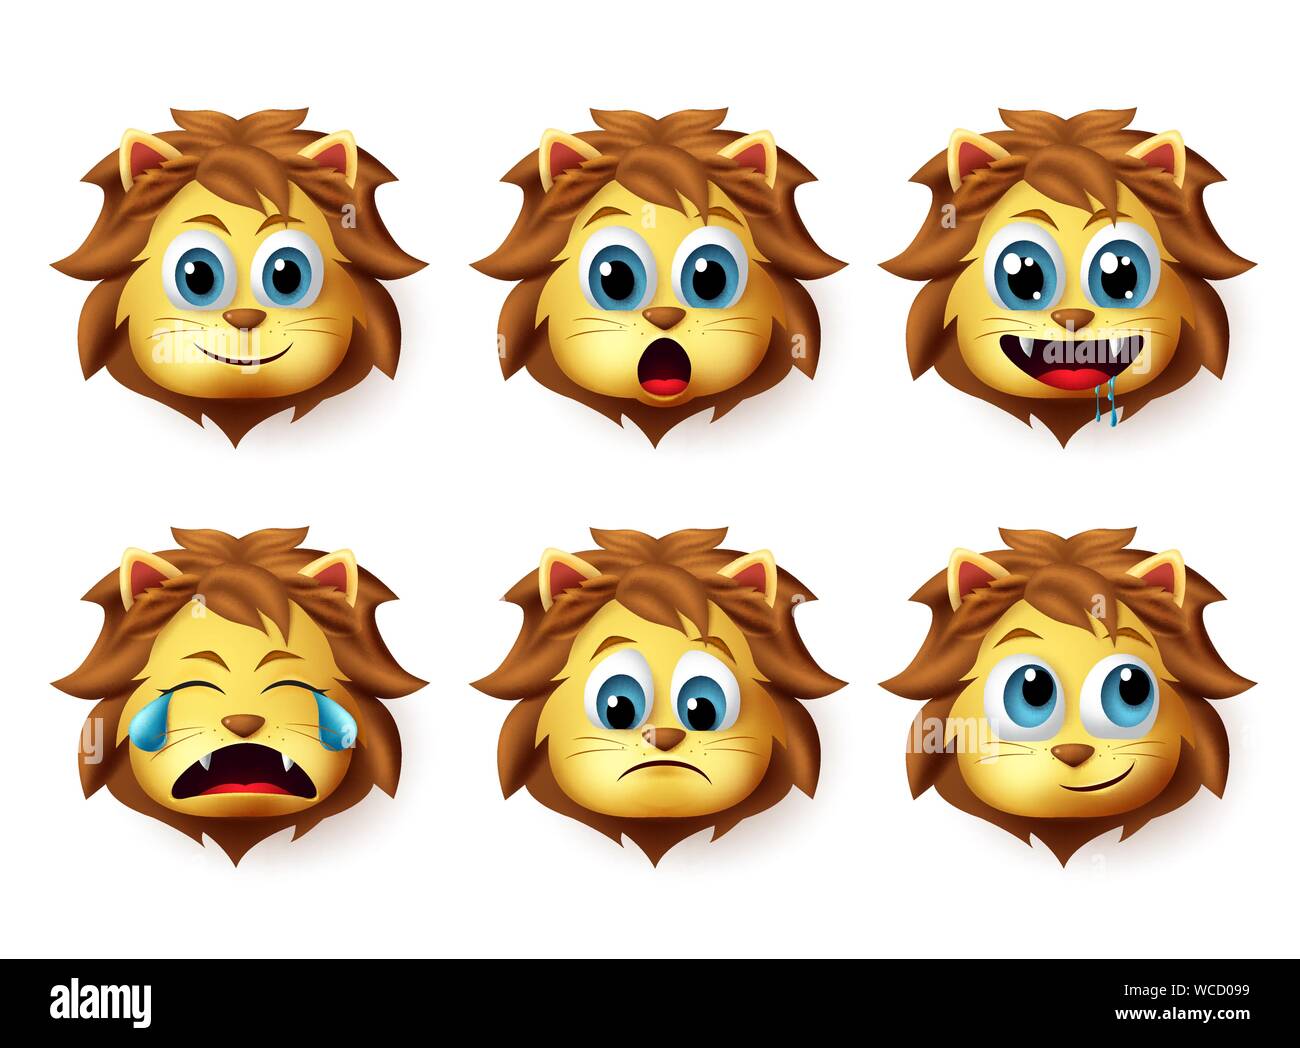 Lion animal emoticon vector set. Lions emoji and emoticon in cute happy facial expression isolated in white background. Vector illustration. Stock Vector